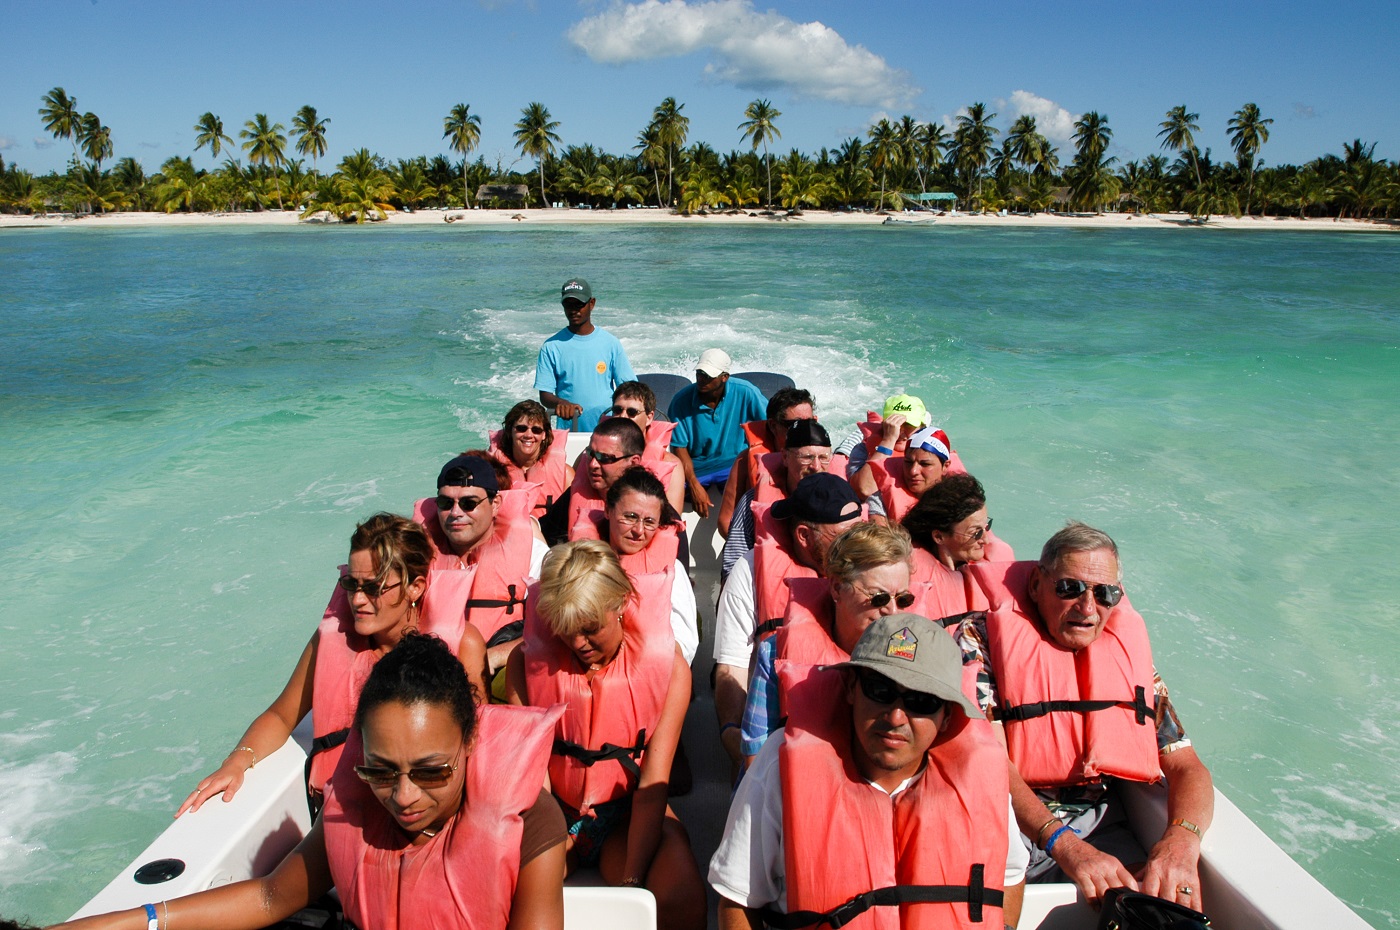 Boat Ride - How To Get to Saona Island